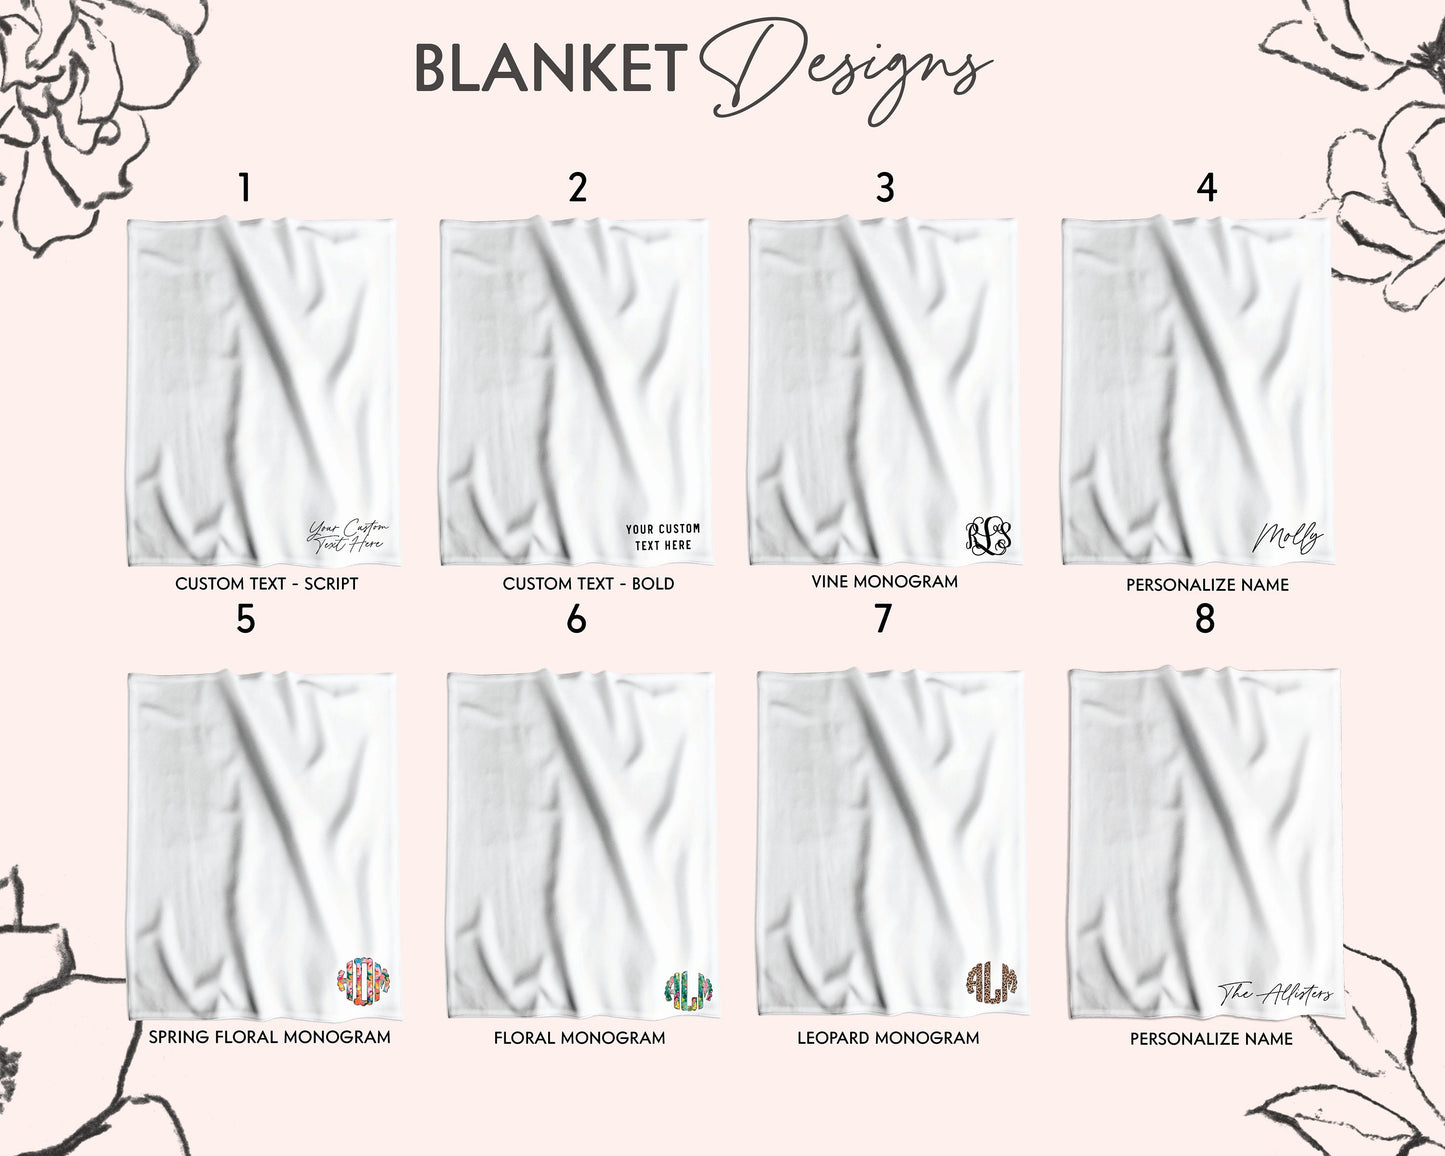 Cozy 50x60" Blanket - Build Your Own Gift Box - Add On